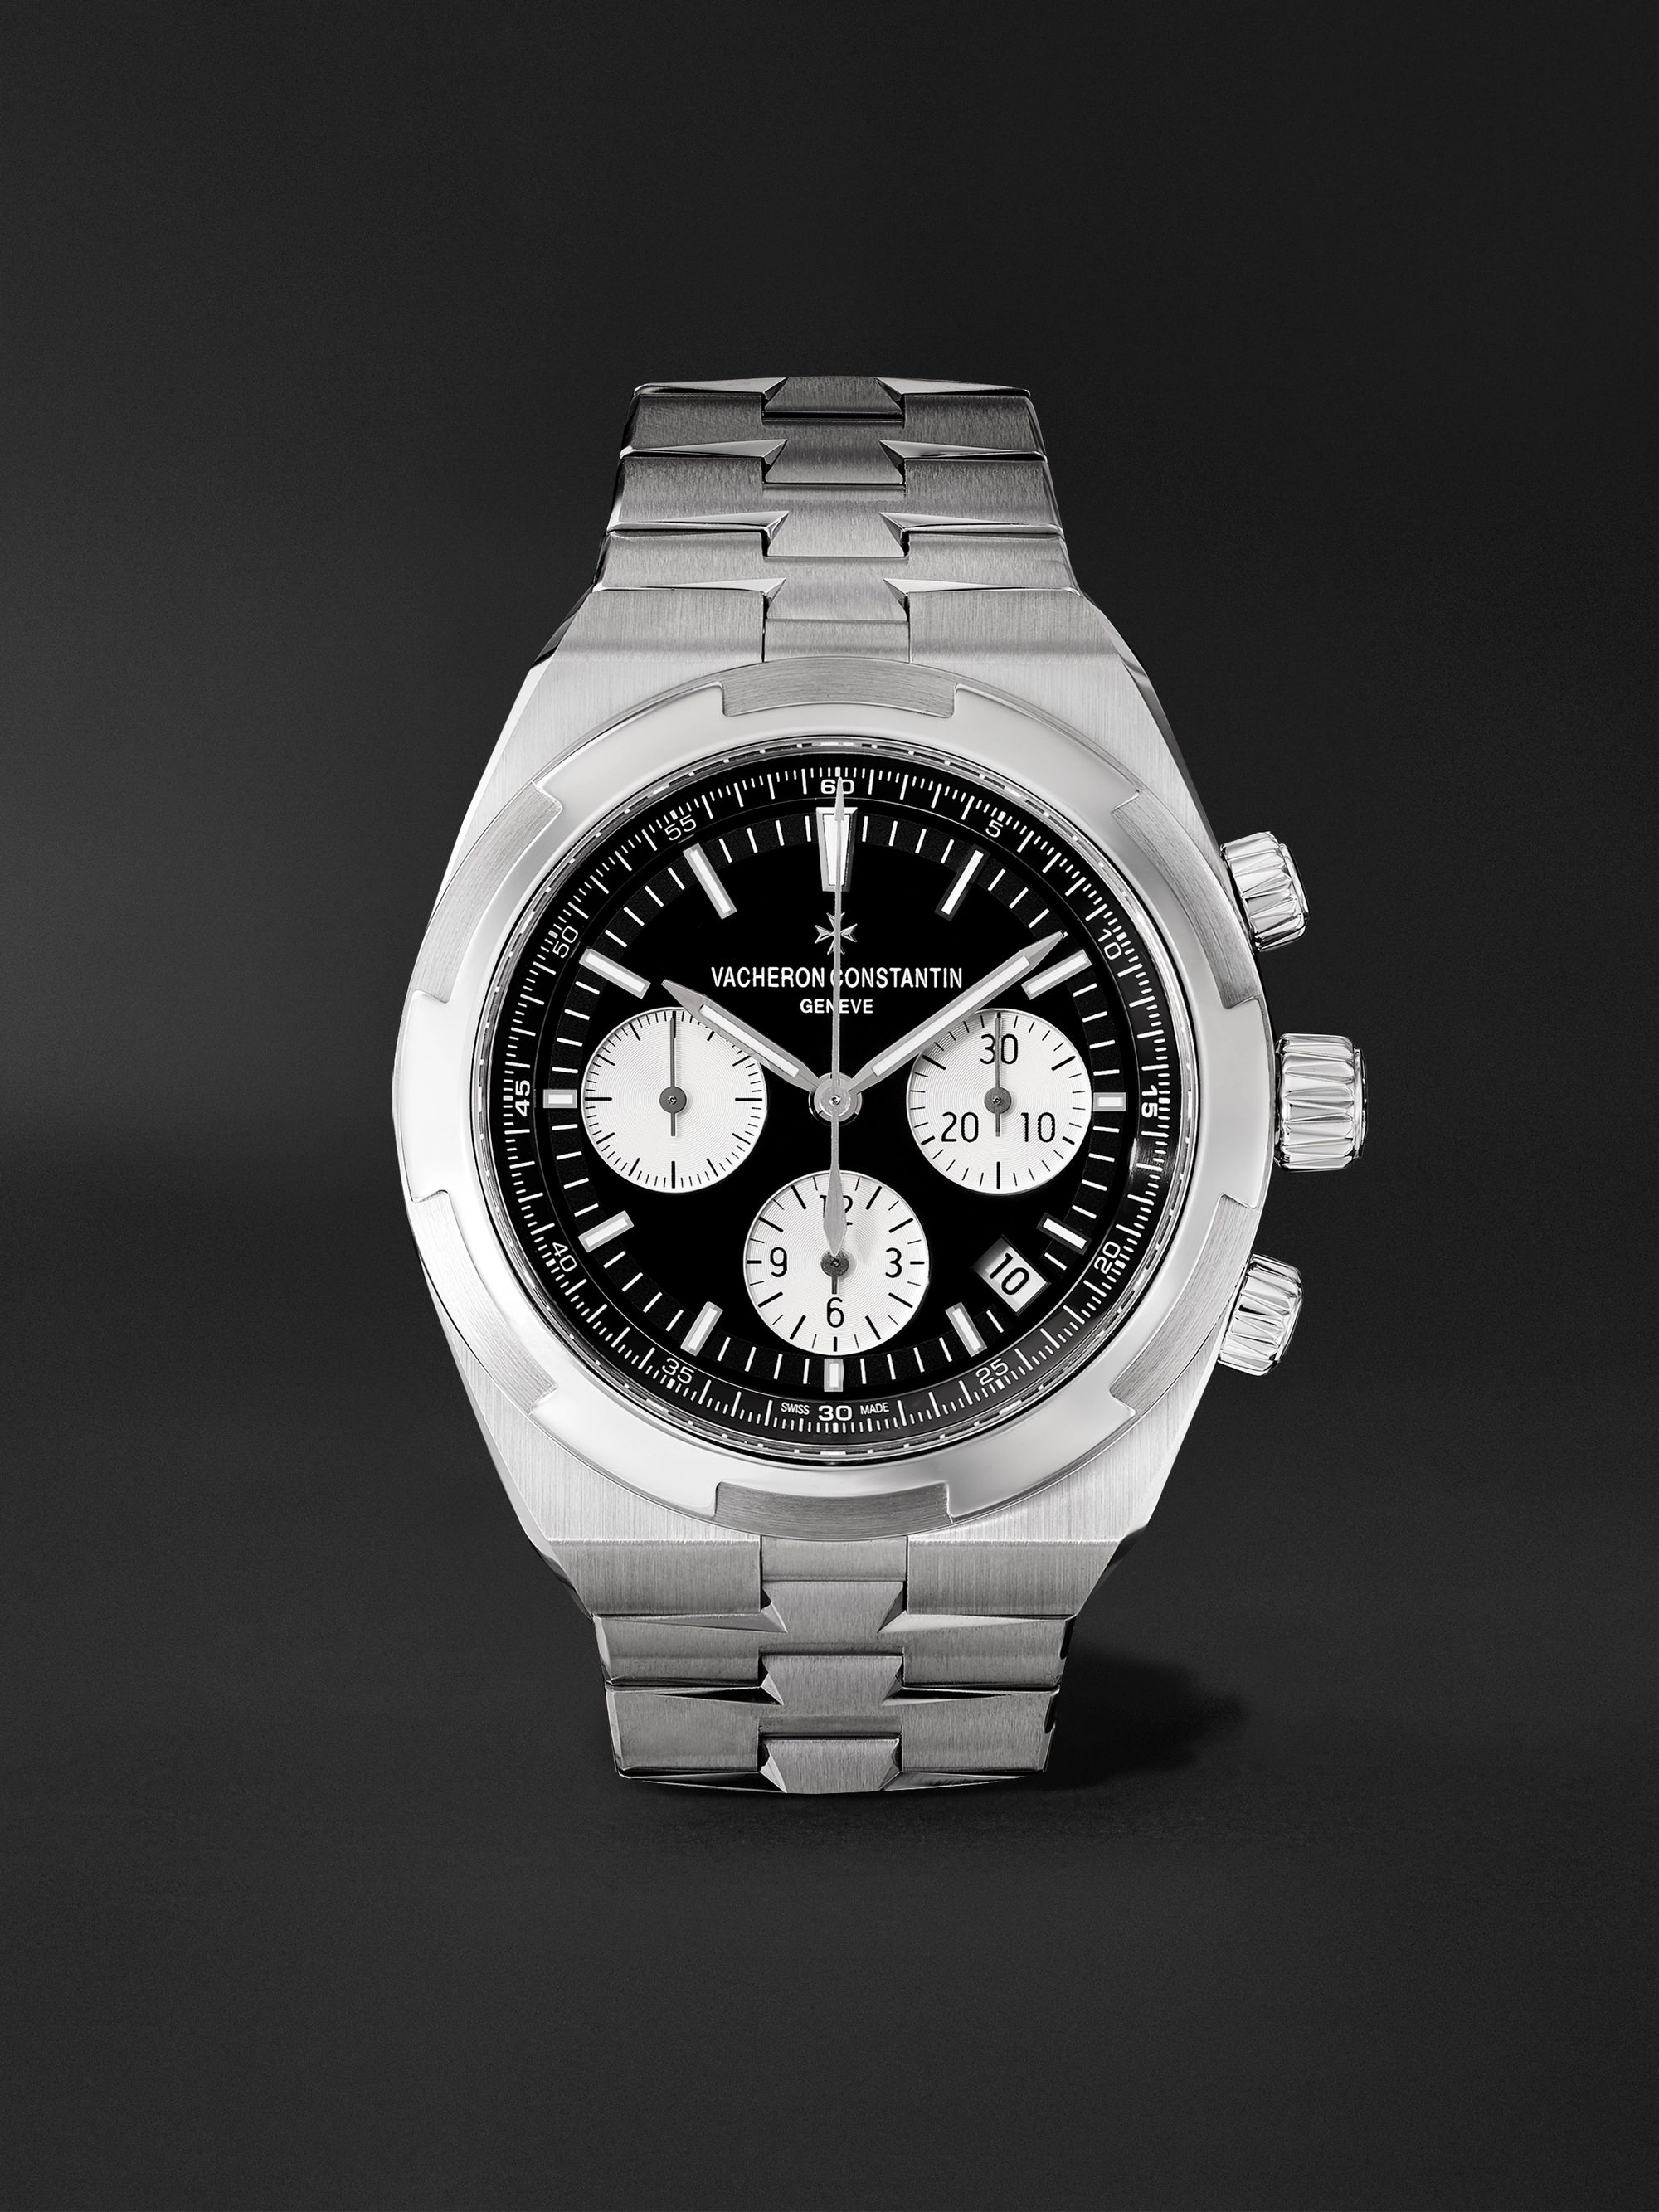 VACHERON CONSTANTIN Overseas Automatic Chronograph 42.5mm Stainless Steel Watch, Ref. No. 5500V/110A-B481